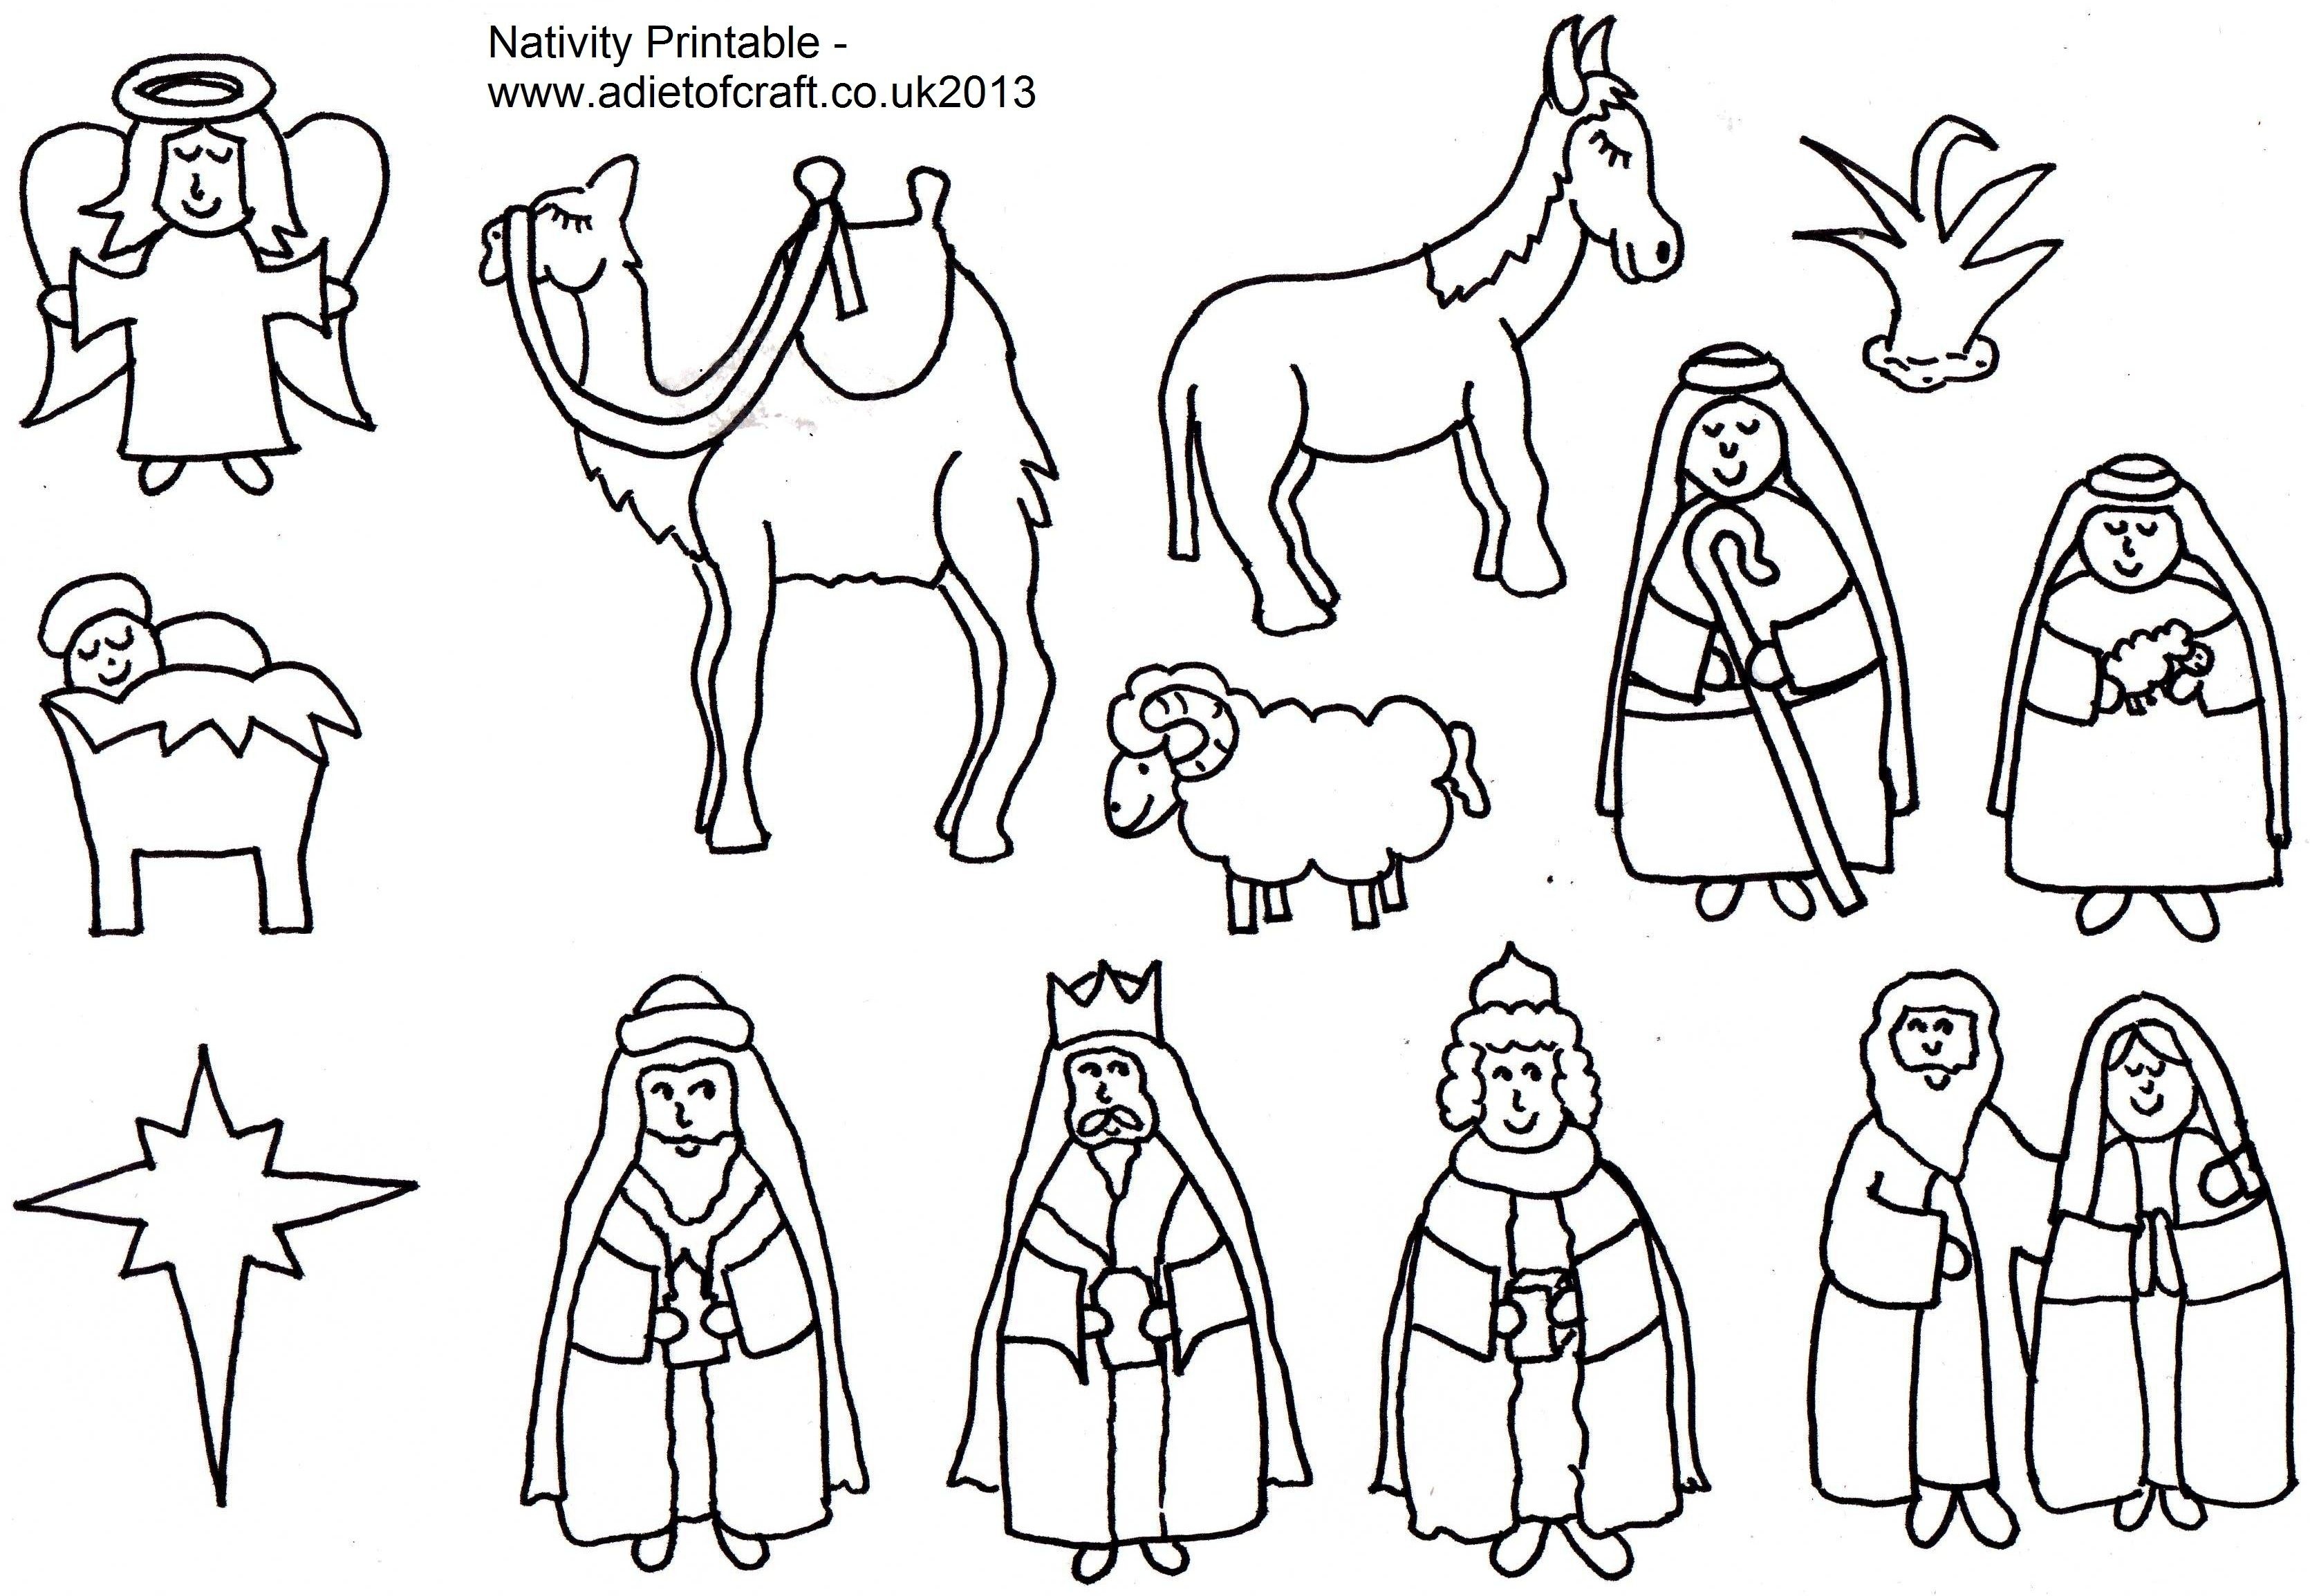 Adult Coloring Pages Of The Nativity Free In Nativity Coloring Pages - Free Printable Christmas Story Coloring Pages